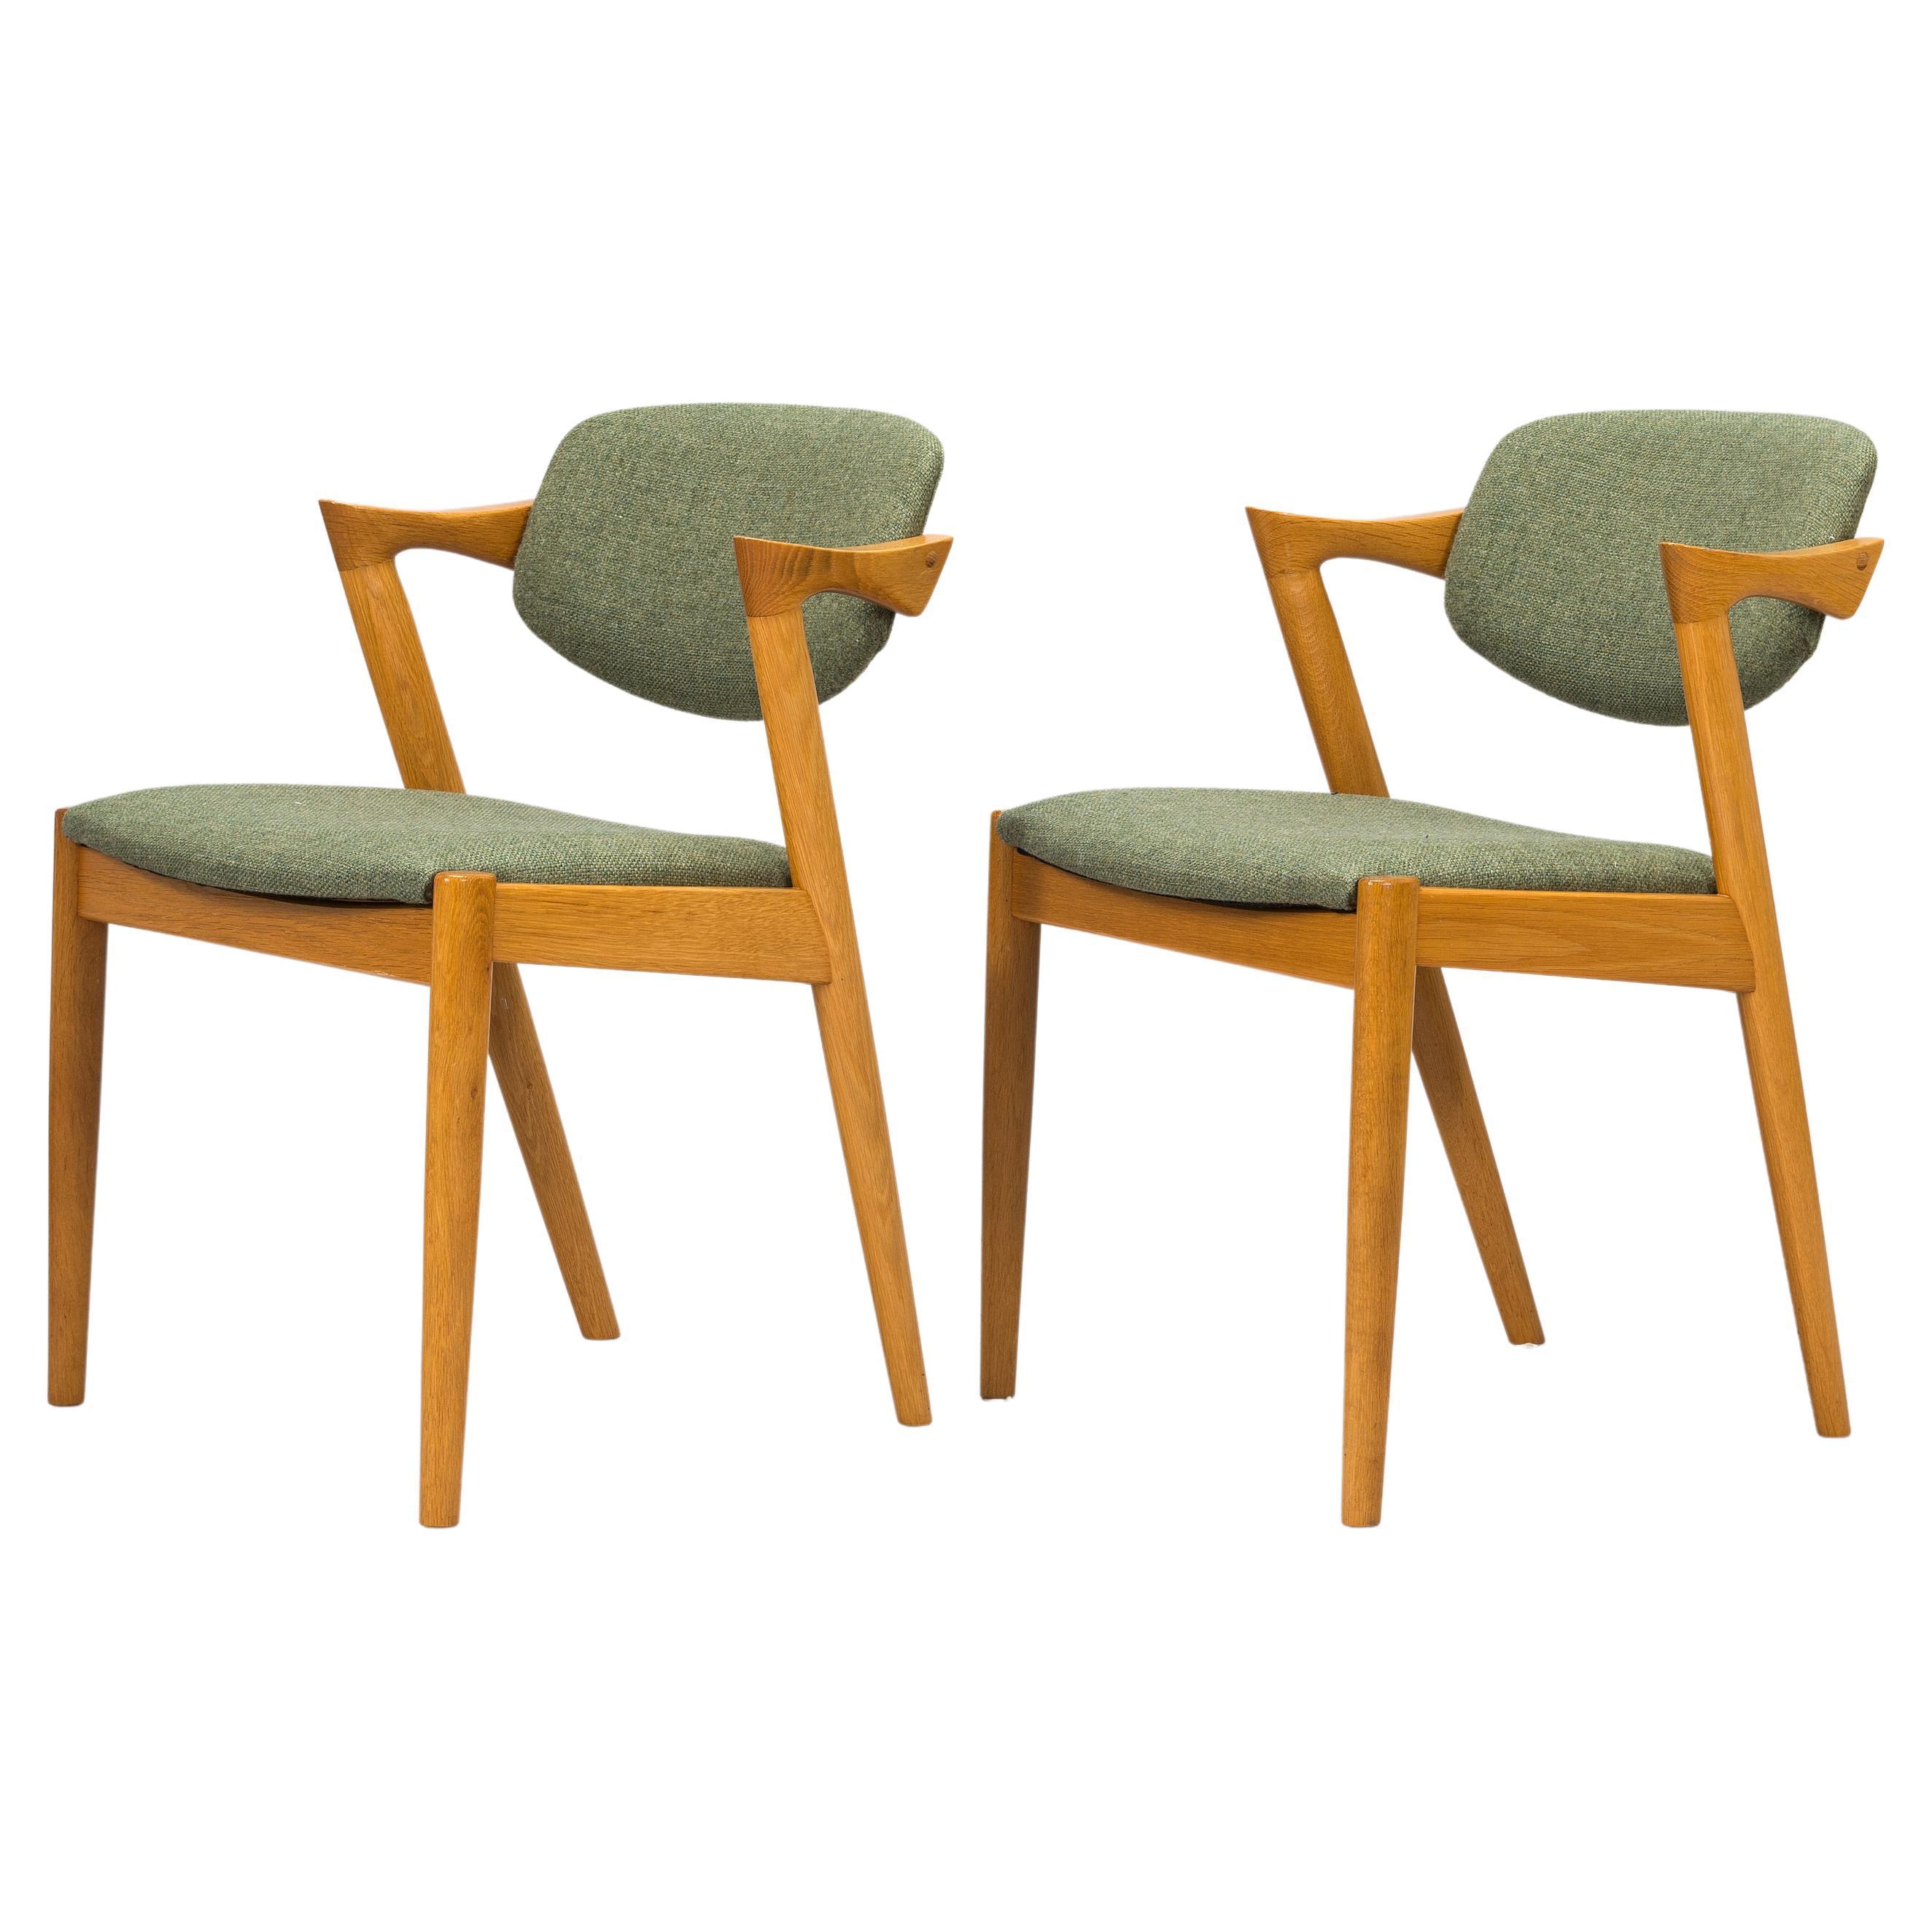 Kai Kristiansen, A set of four 'Z-chair' chairs, Denmark, 1960s.

The seat and backrest are upholstered with green fabric. Seat height 46 cm, height 75 cm.

